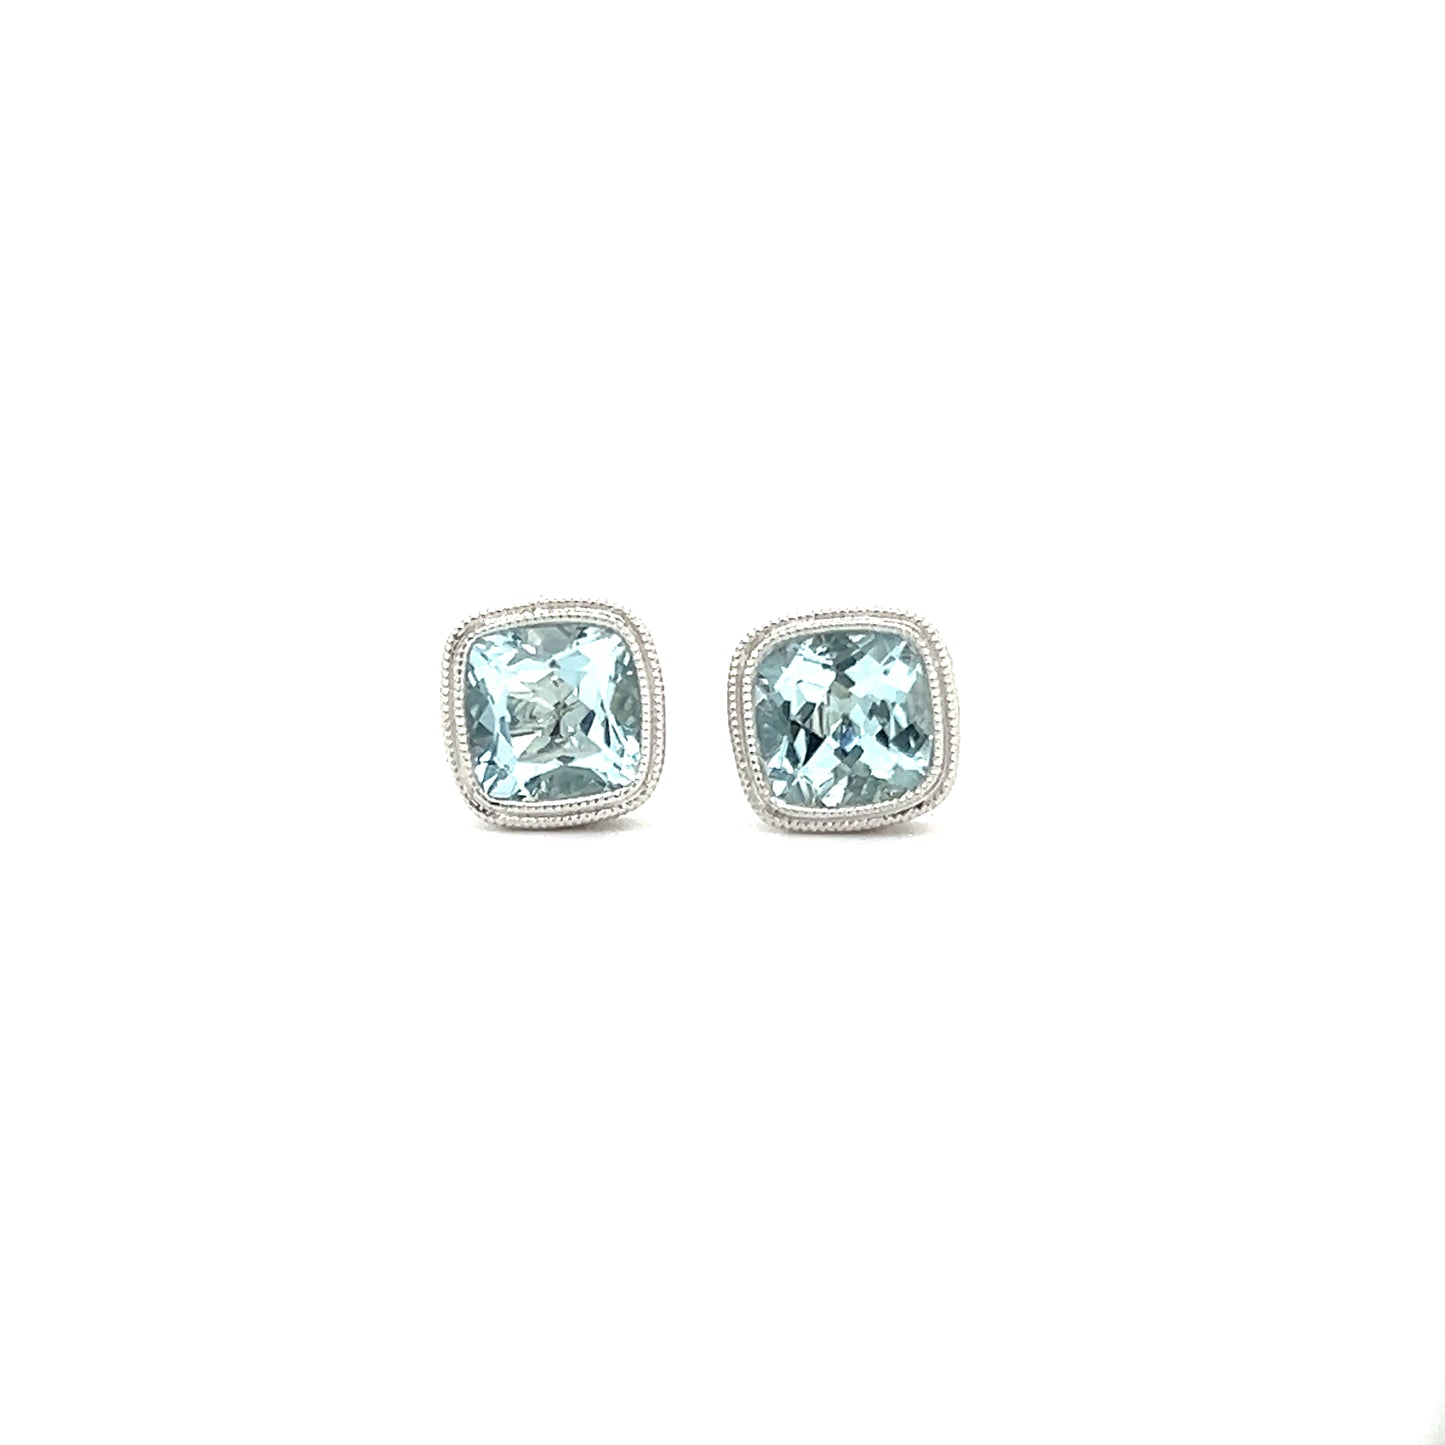 Aquamarine Stud Earrings with Milgrain and Filigree Details in 14K White Gold Front View